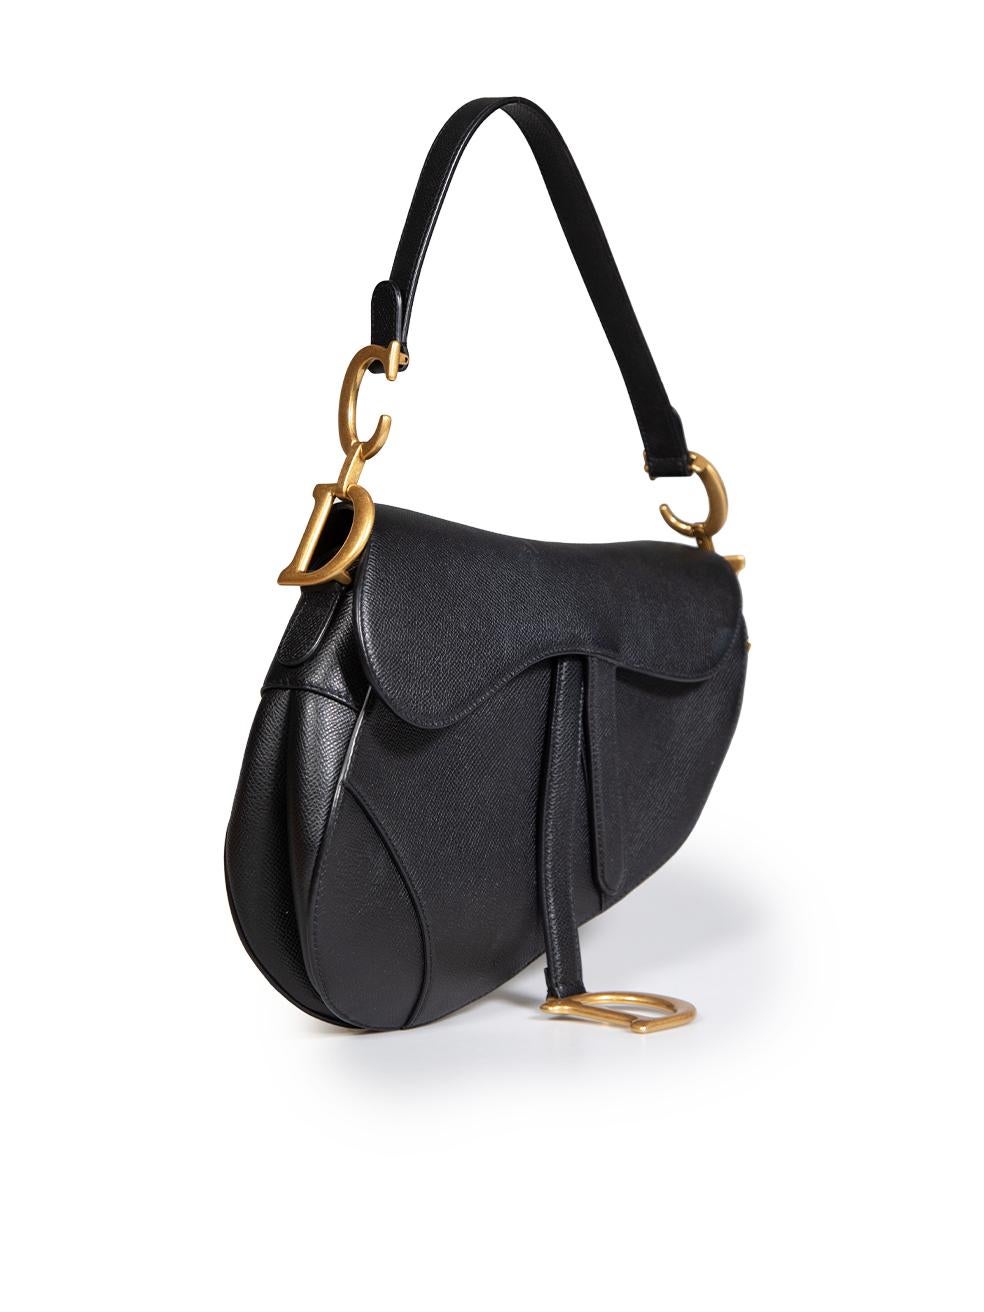 CONDITION is Very good. Minimal wear to the bag is evident. Light discolouration on the top of the flap on this used Dior designer resale item.
 
 
 
 Details
 
 
 Datecode - 09-MA-0250 (2020)
 
 Black
 
 Calfskin
 
 Saddle bag
 
 1x Leather handle
